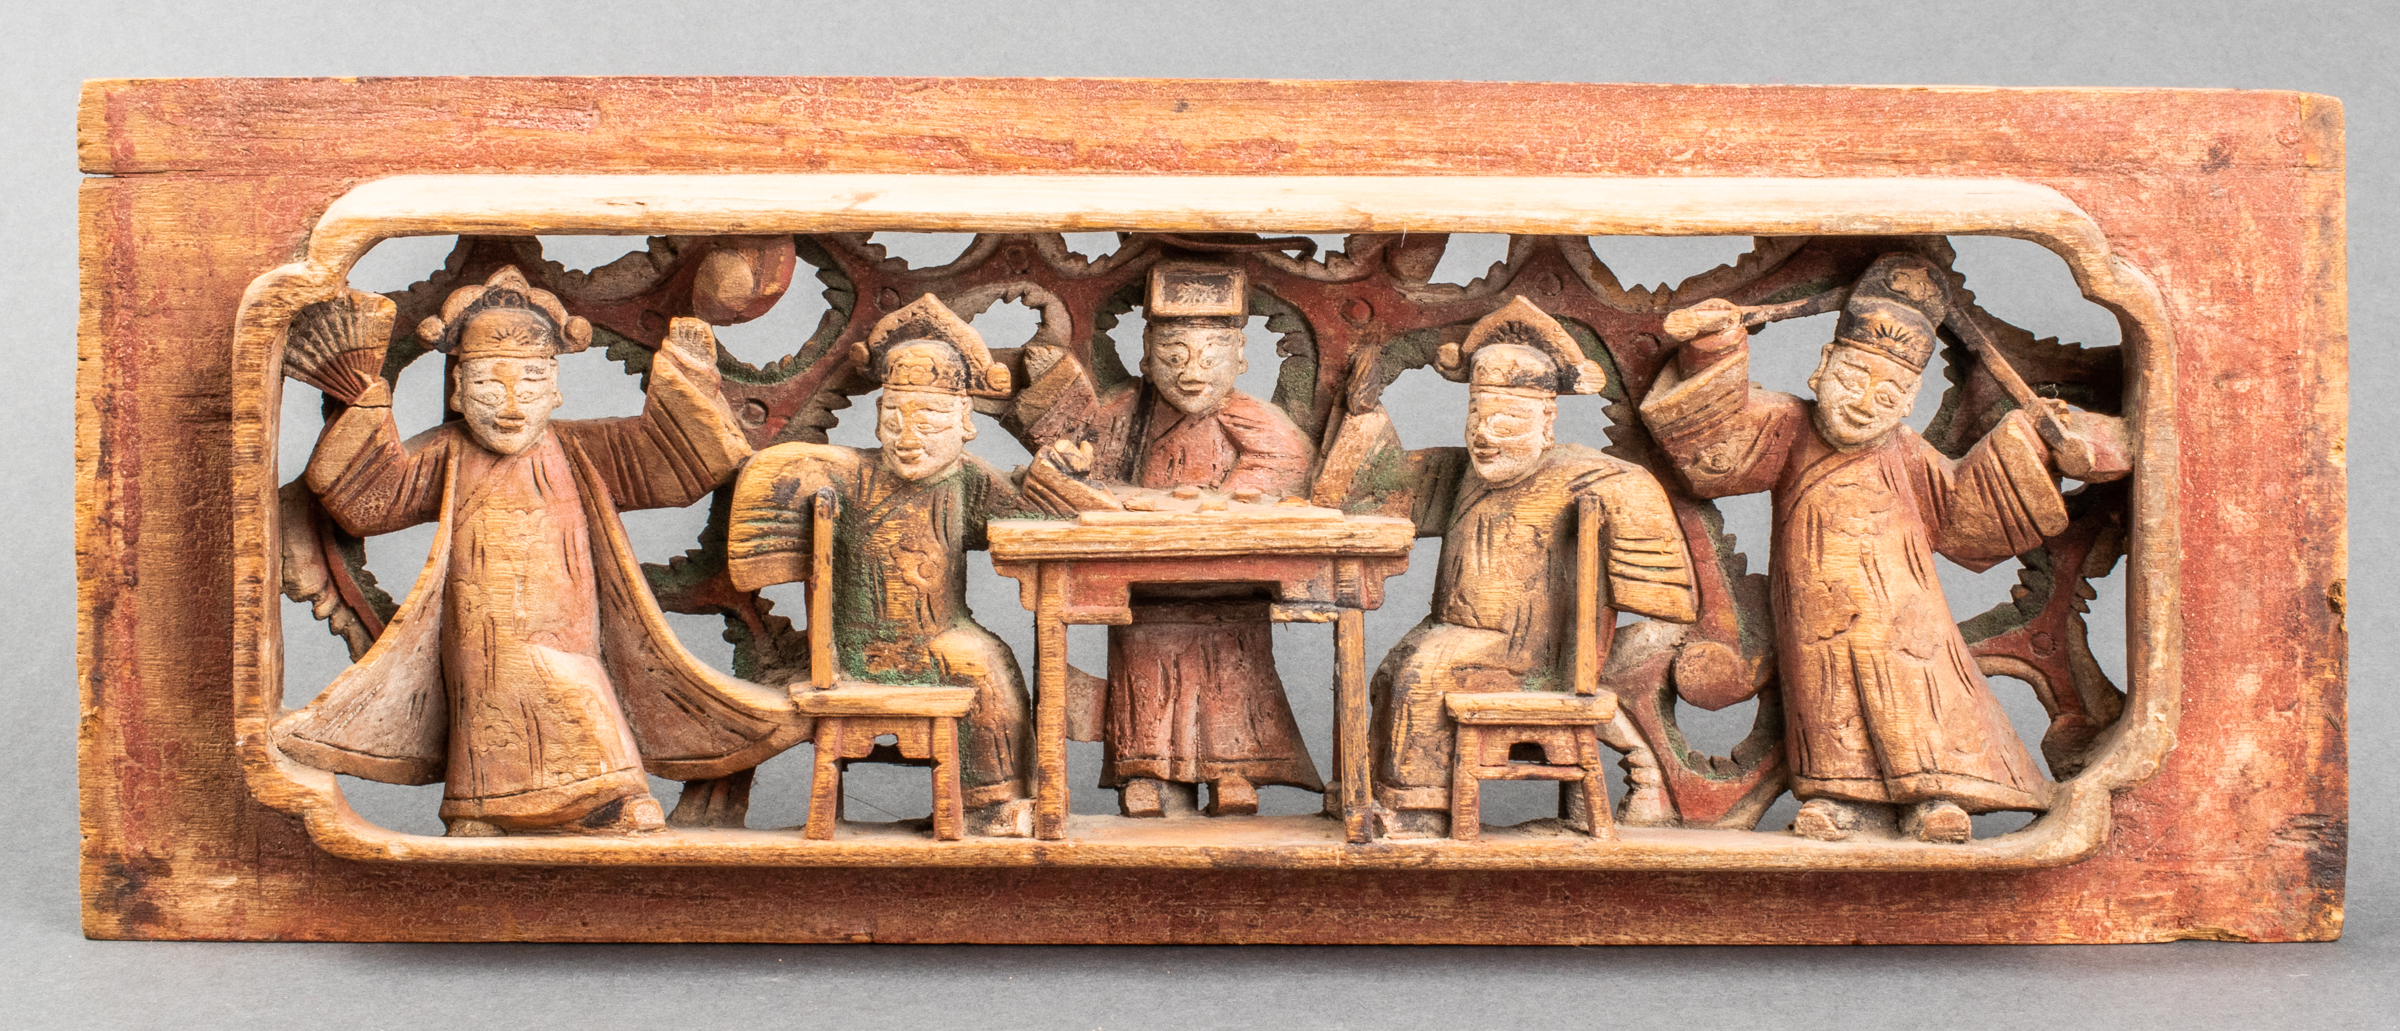 SOUTH CHINESE POLYCHROME WOOD PANEL  3c3d51